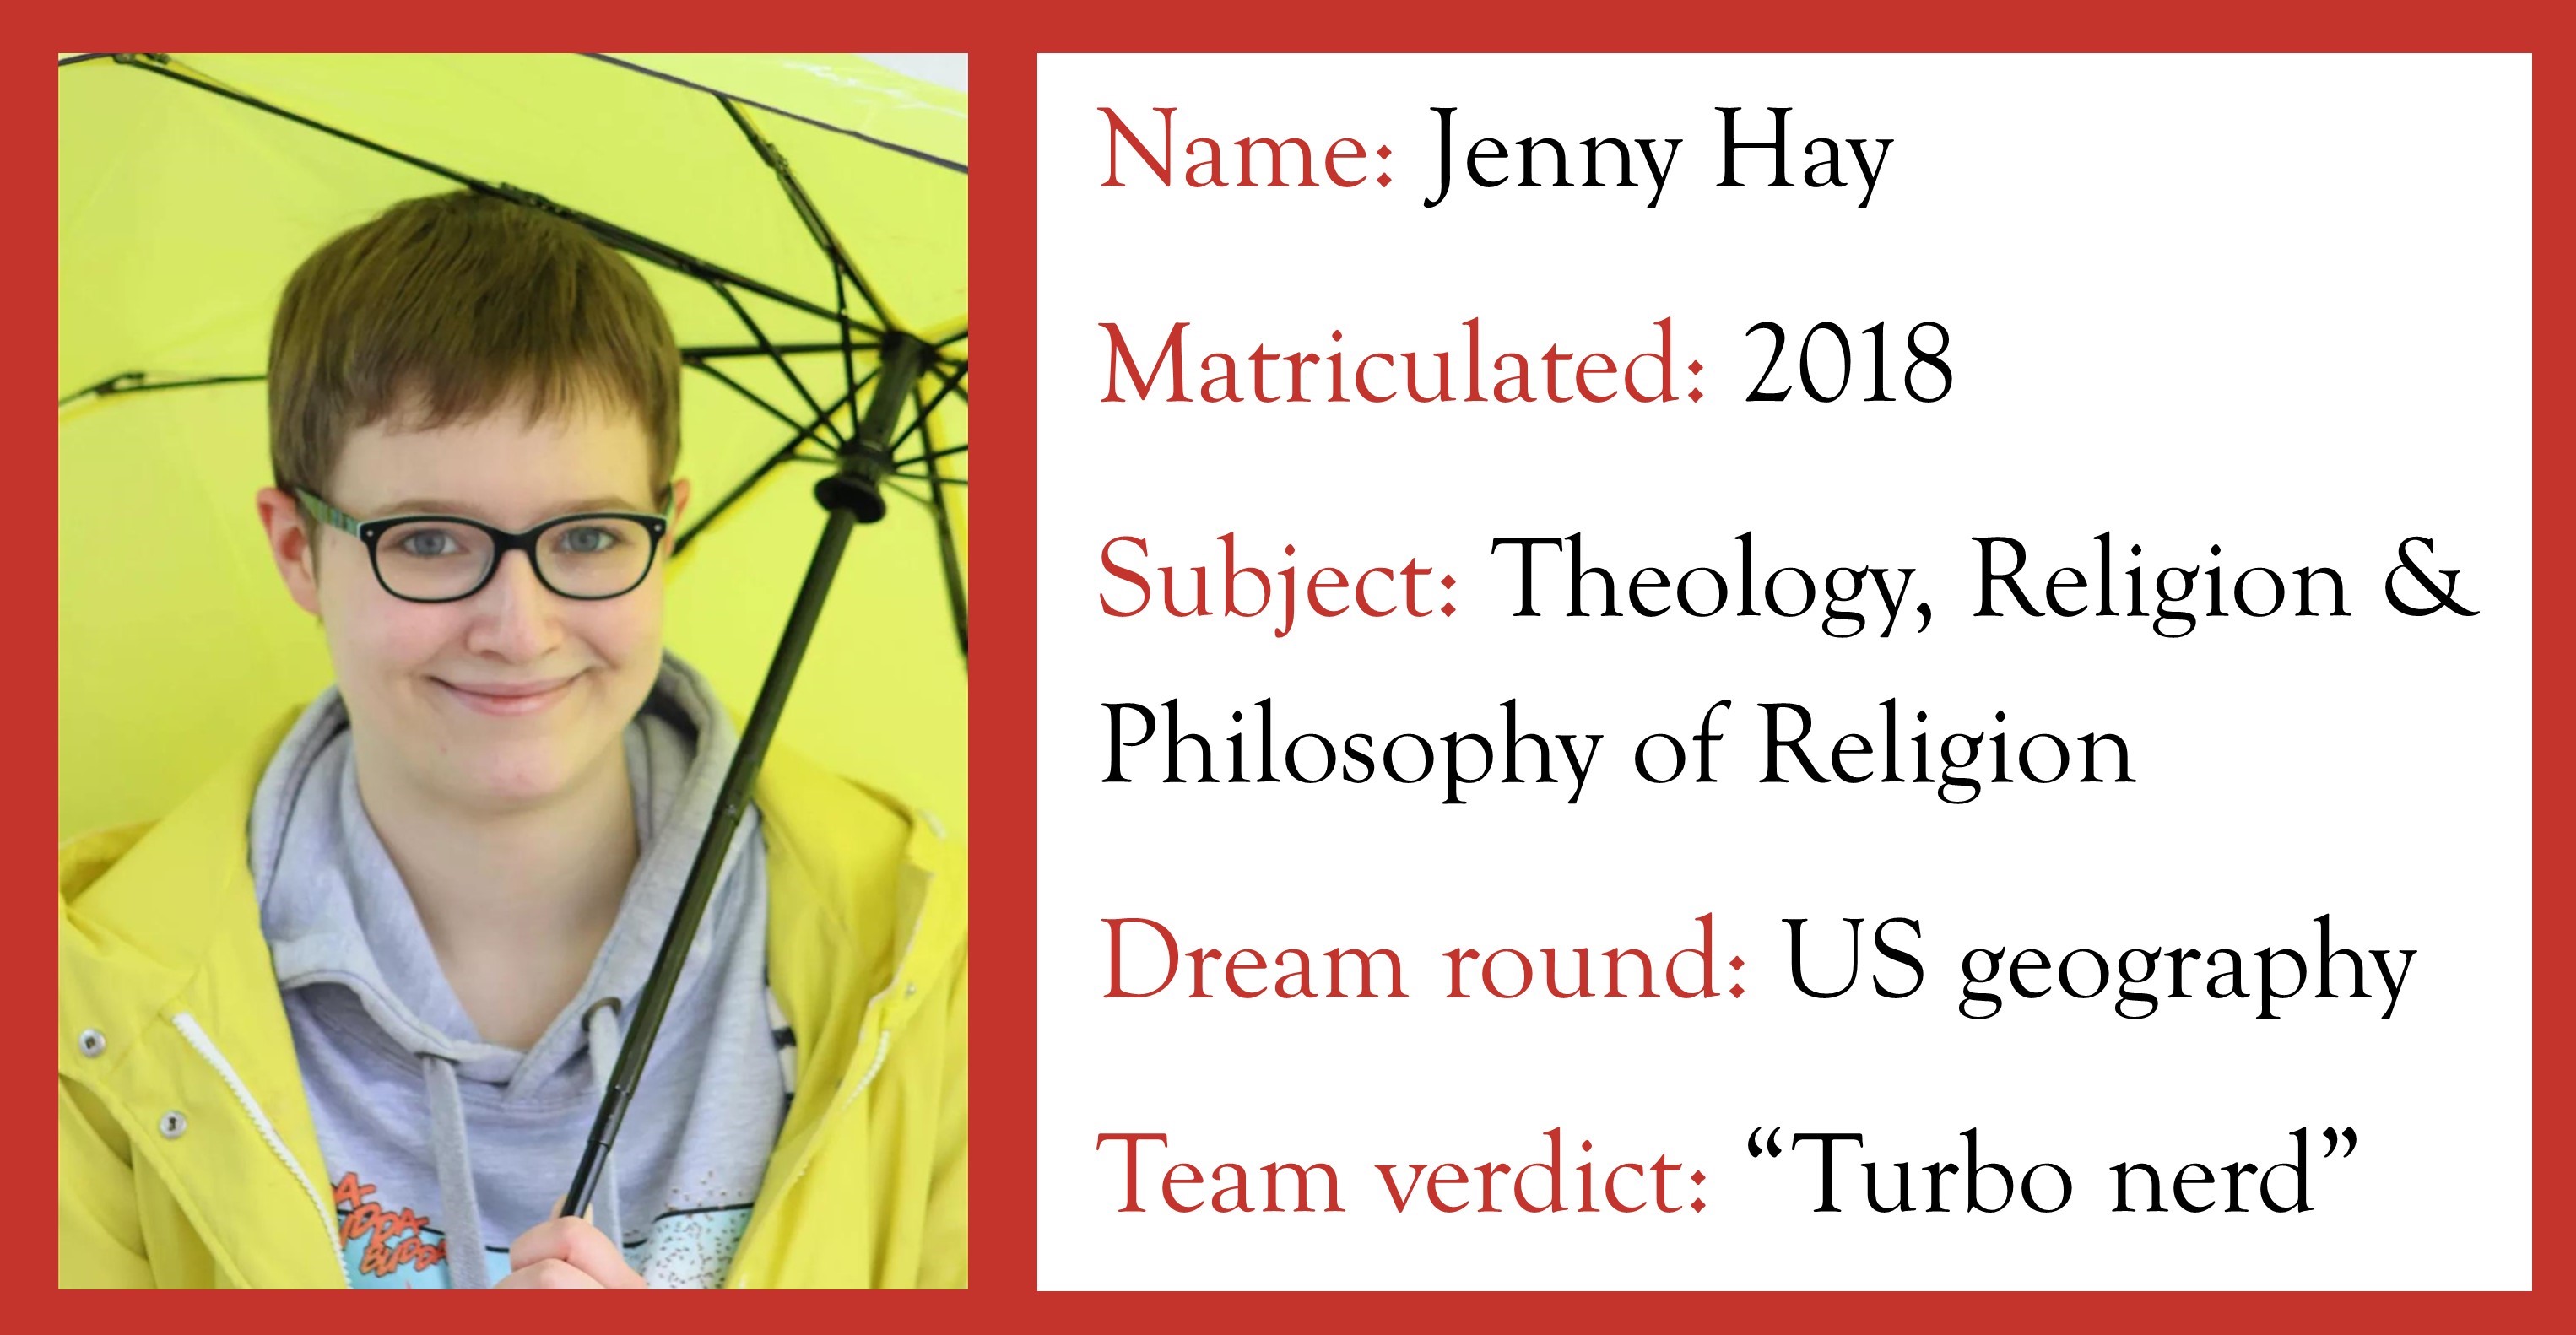 Profile for Jenny Hay